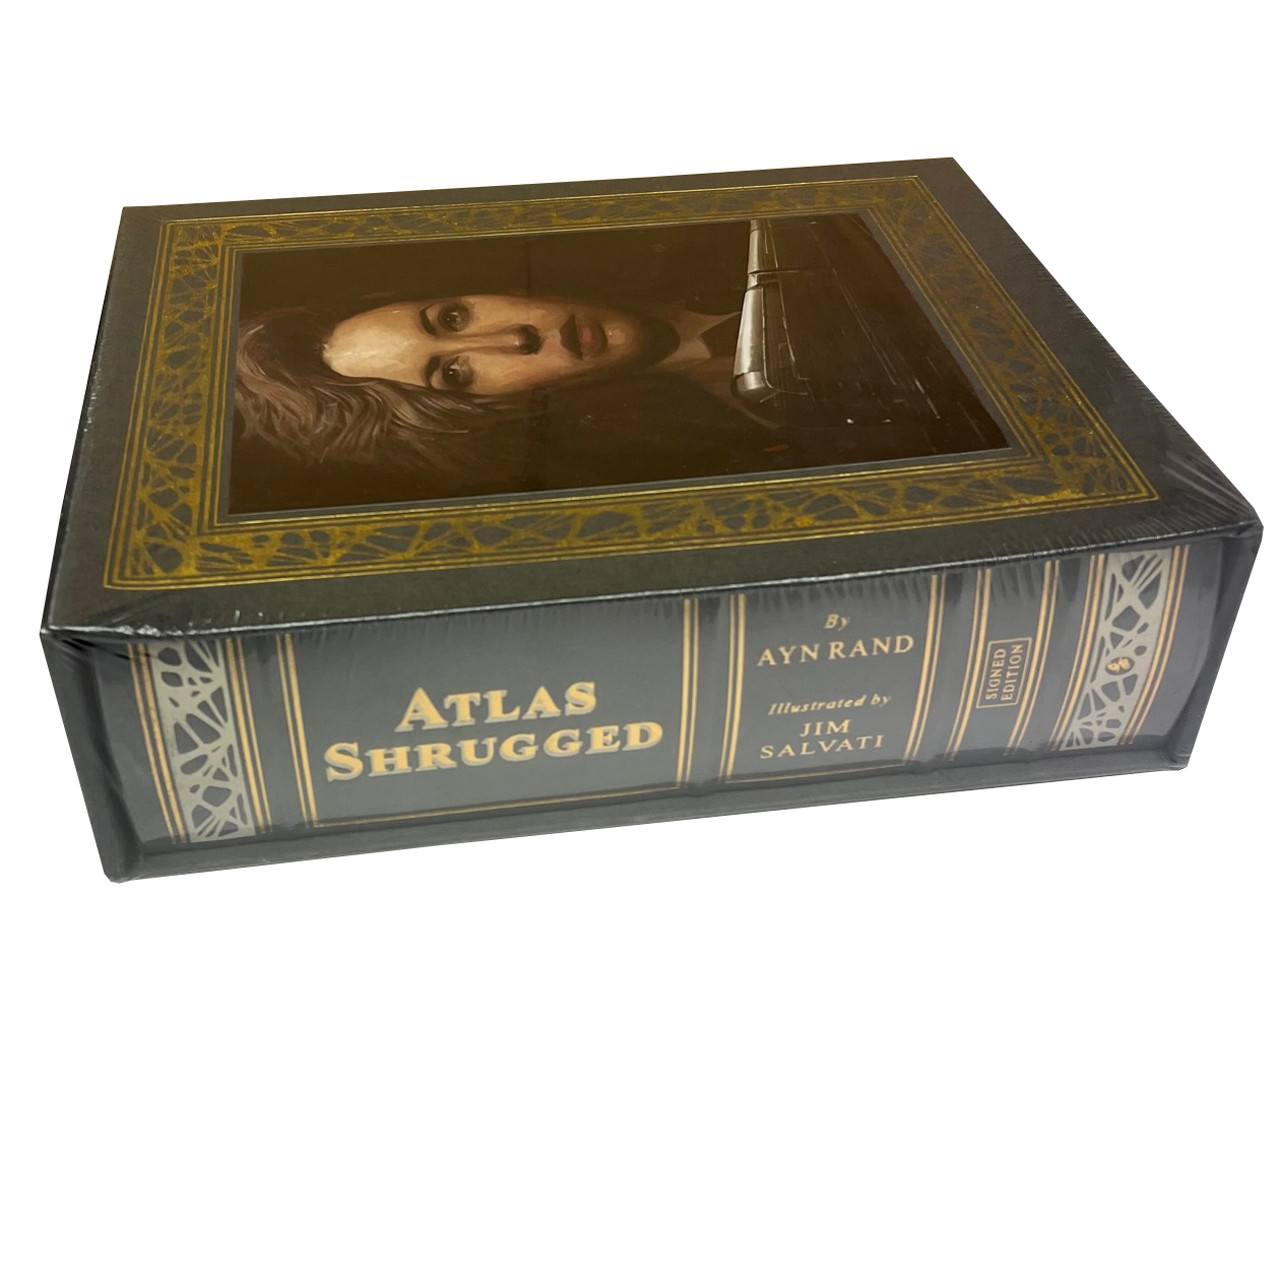 Ayn Rand "Atlas Shrugged" Slipcased Deluxe Signed Artist Edition, Leather Bound Collector's Edition of 1,200  [Sealed]